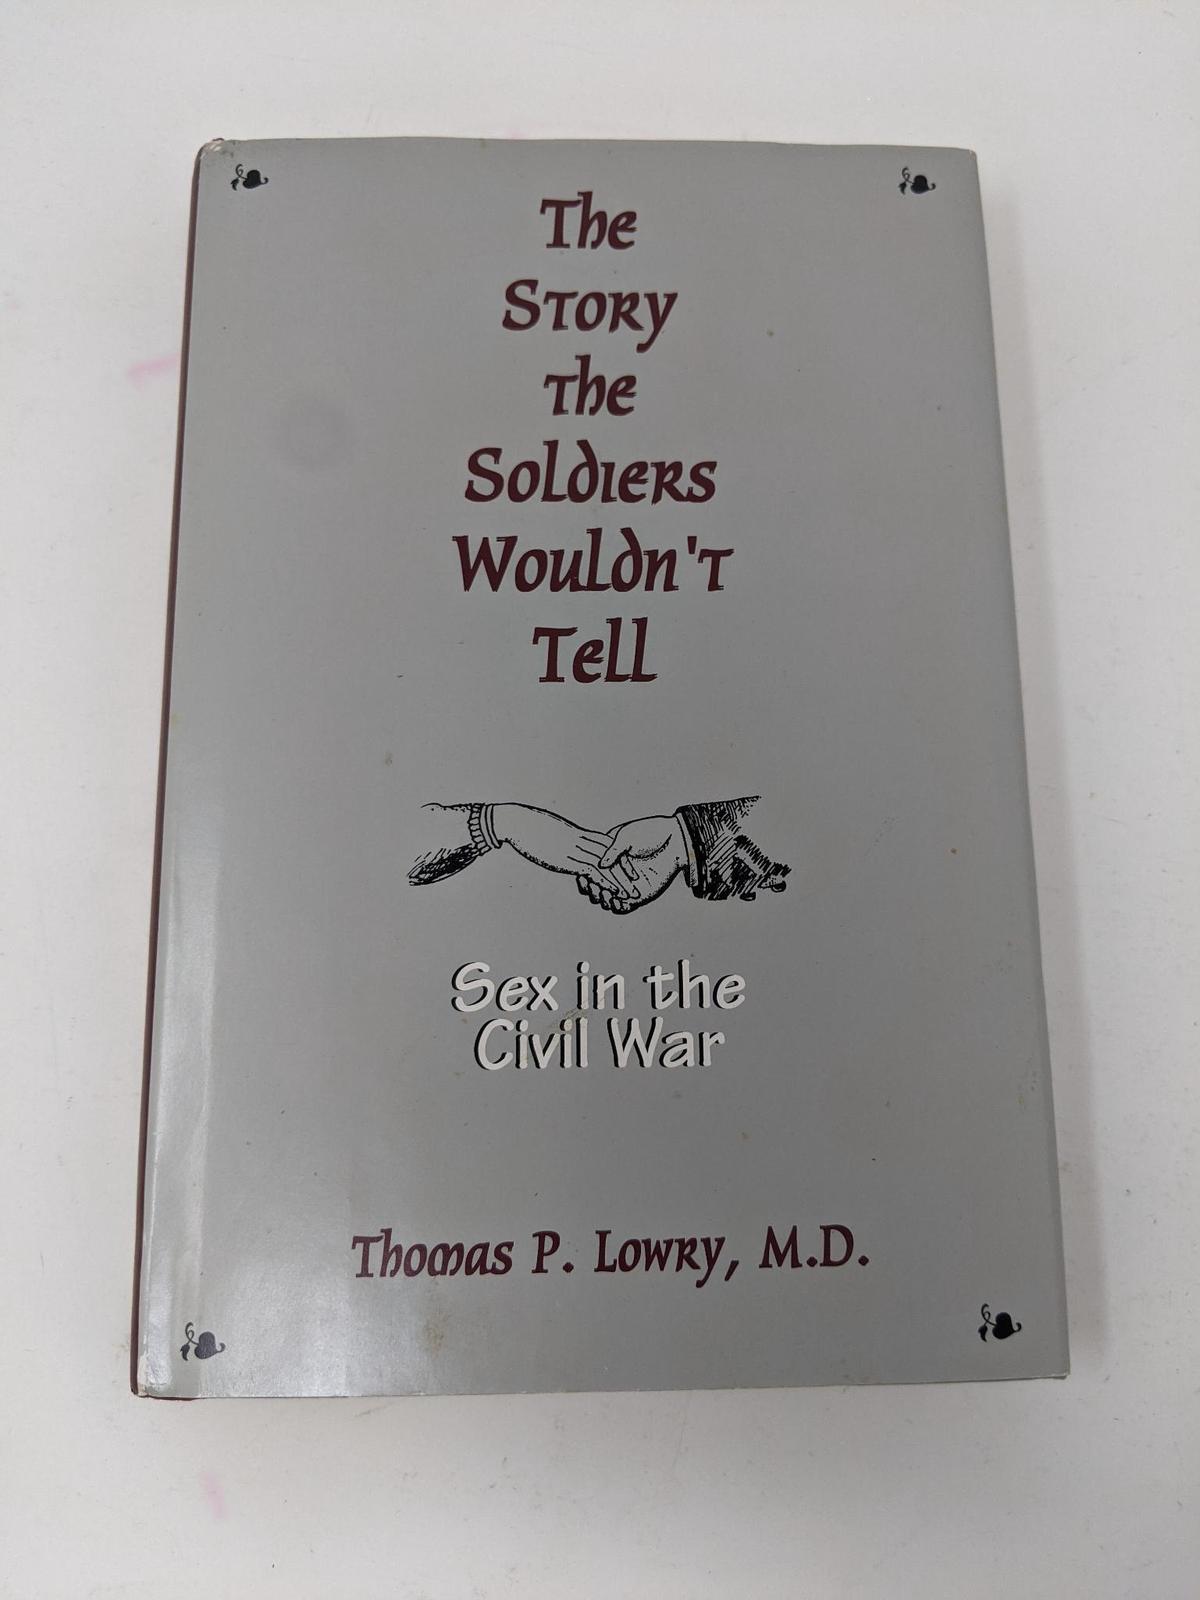 "The Story the Soldiers Wouldn't Tell...Sex in the Civil War", Thomas P. Lowry, M.D., 1994